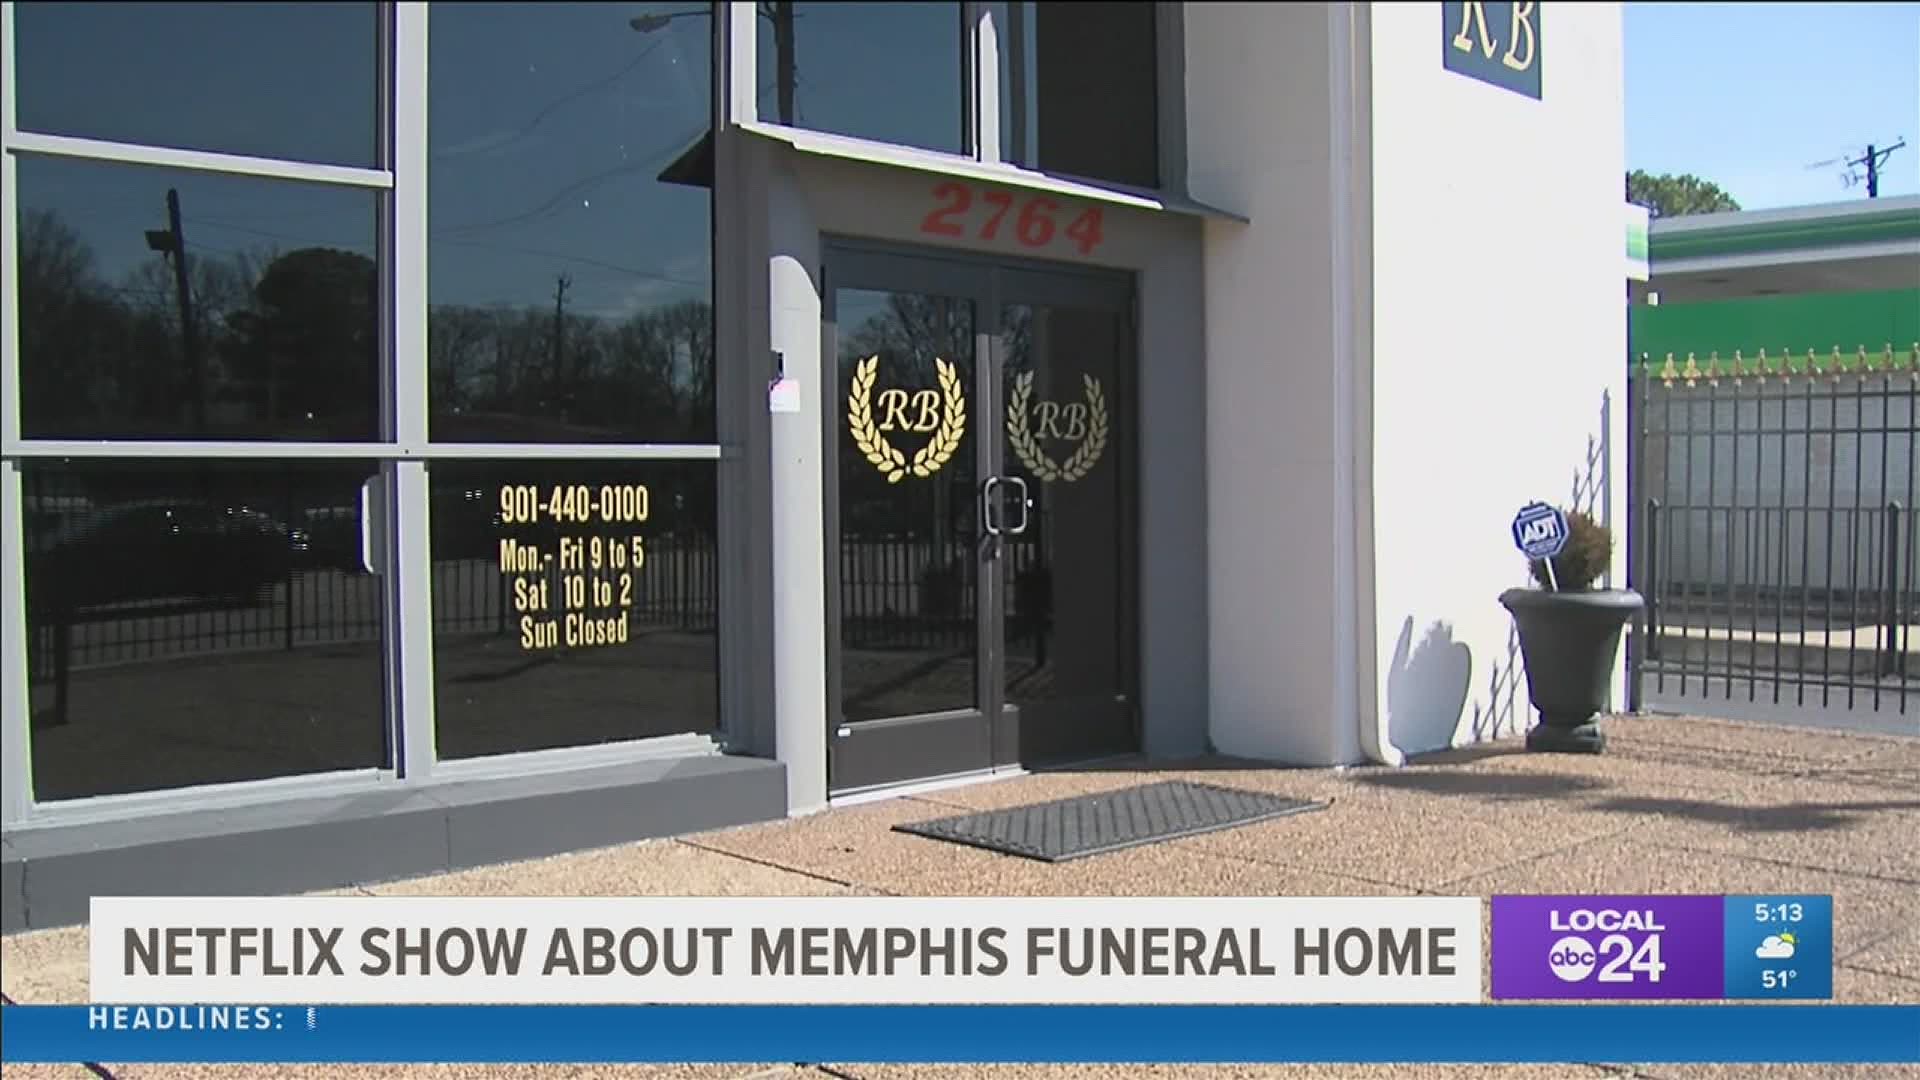 R. Bernard Funeral Services has twice before experienced "fame" but a new reality show focused on the family business will put them in a bigger spotlight.